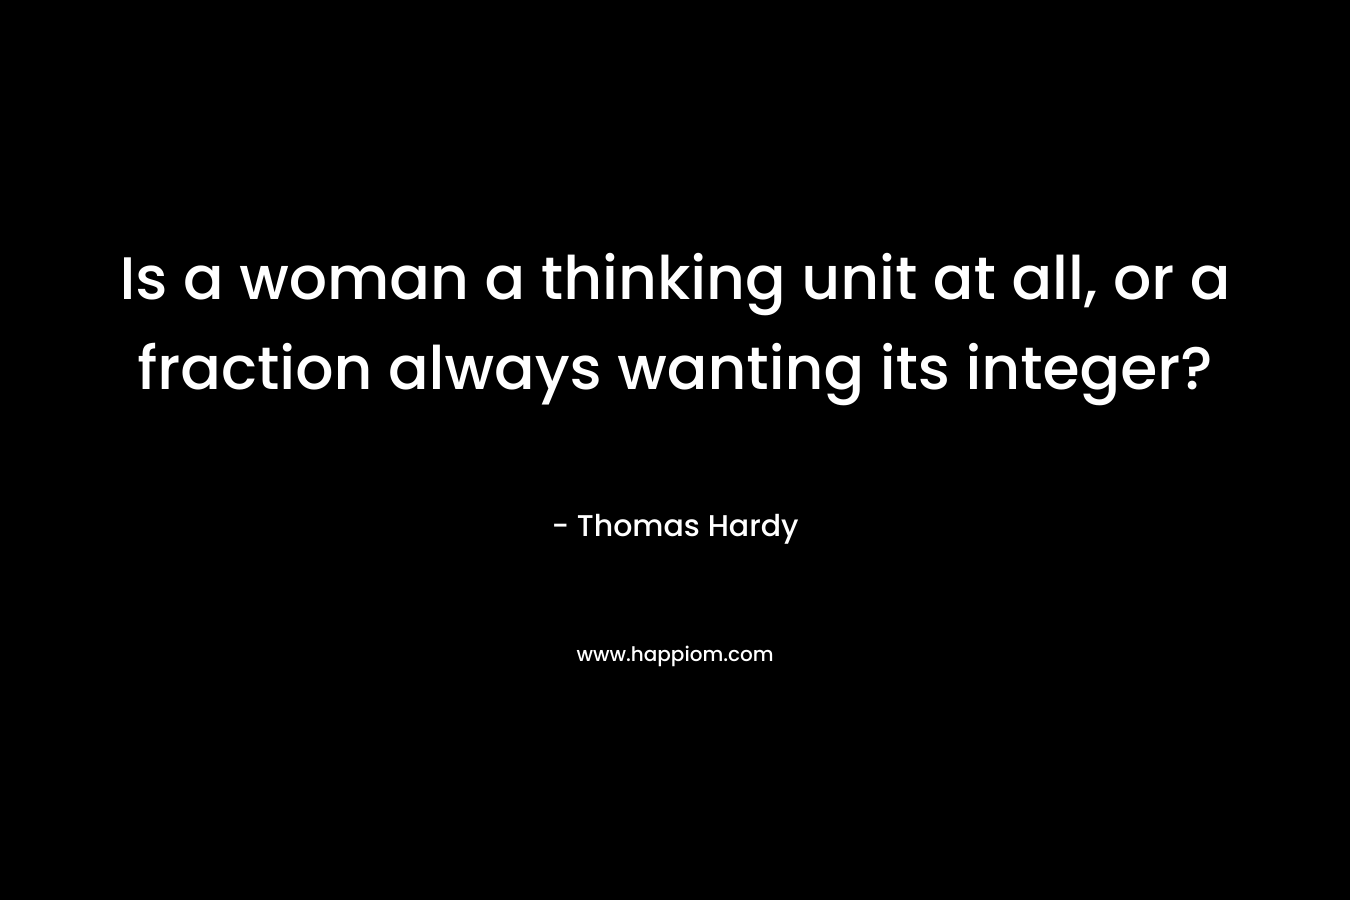 Is a woman a thinking unit at all, or a fraction always wanting its integer? – Thomas Hardy